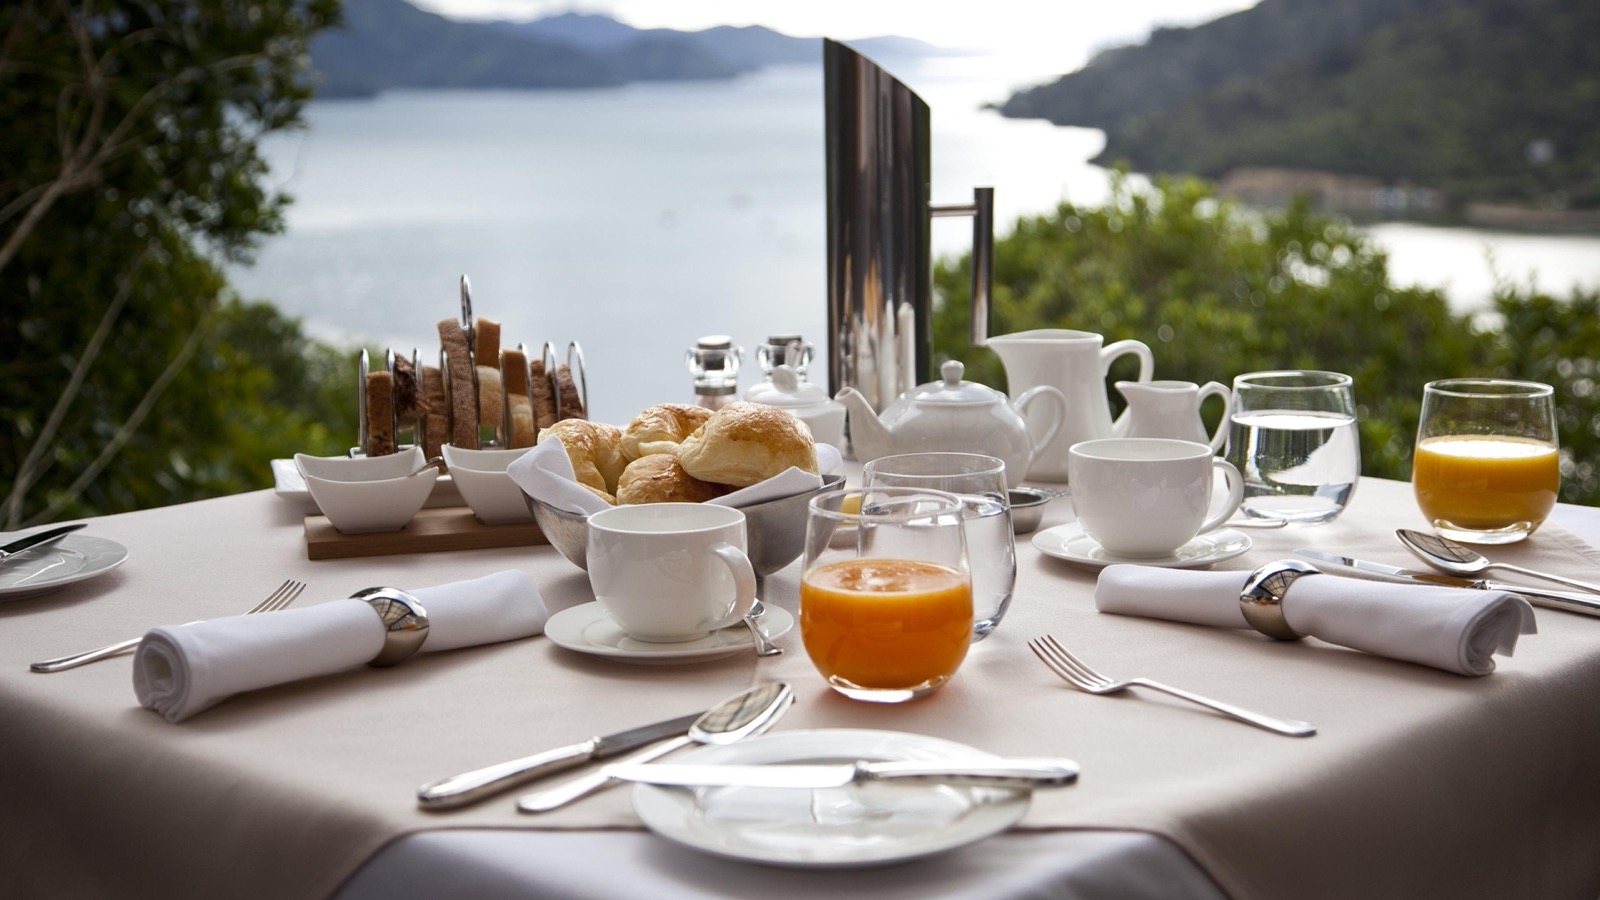 Spend the Most Ideal Day to Find Out the Exact Number of Kids You’re Having Breakfast With A View